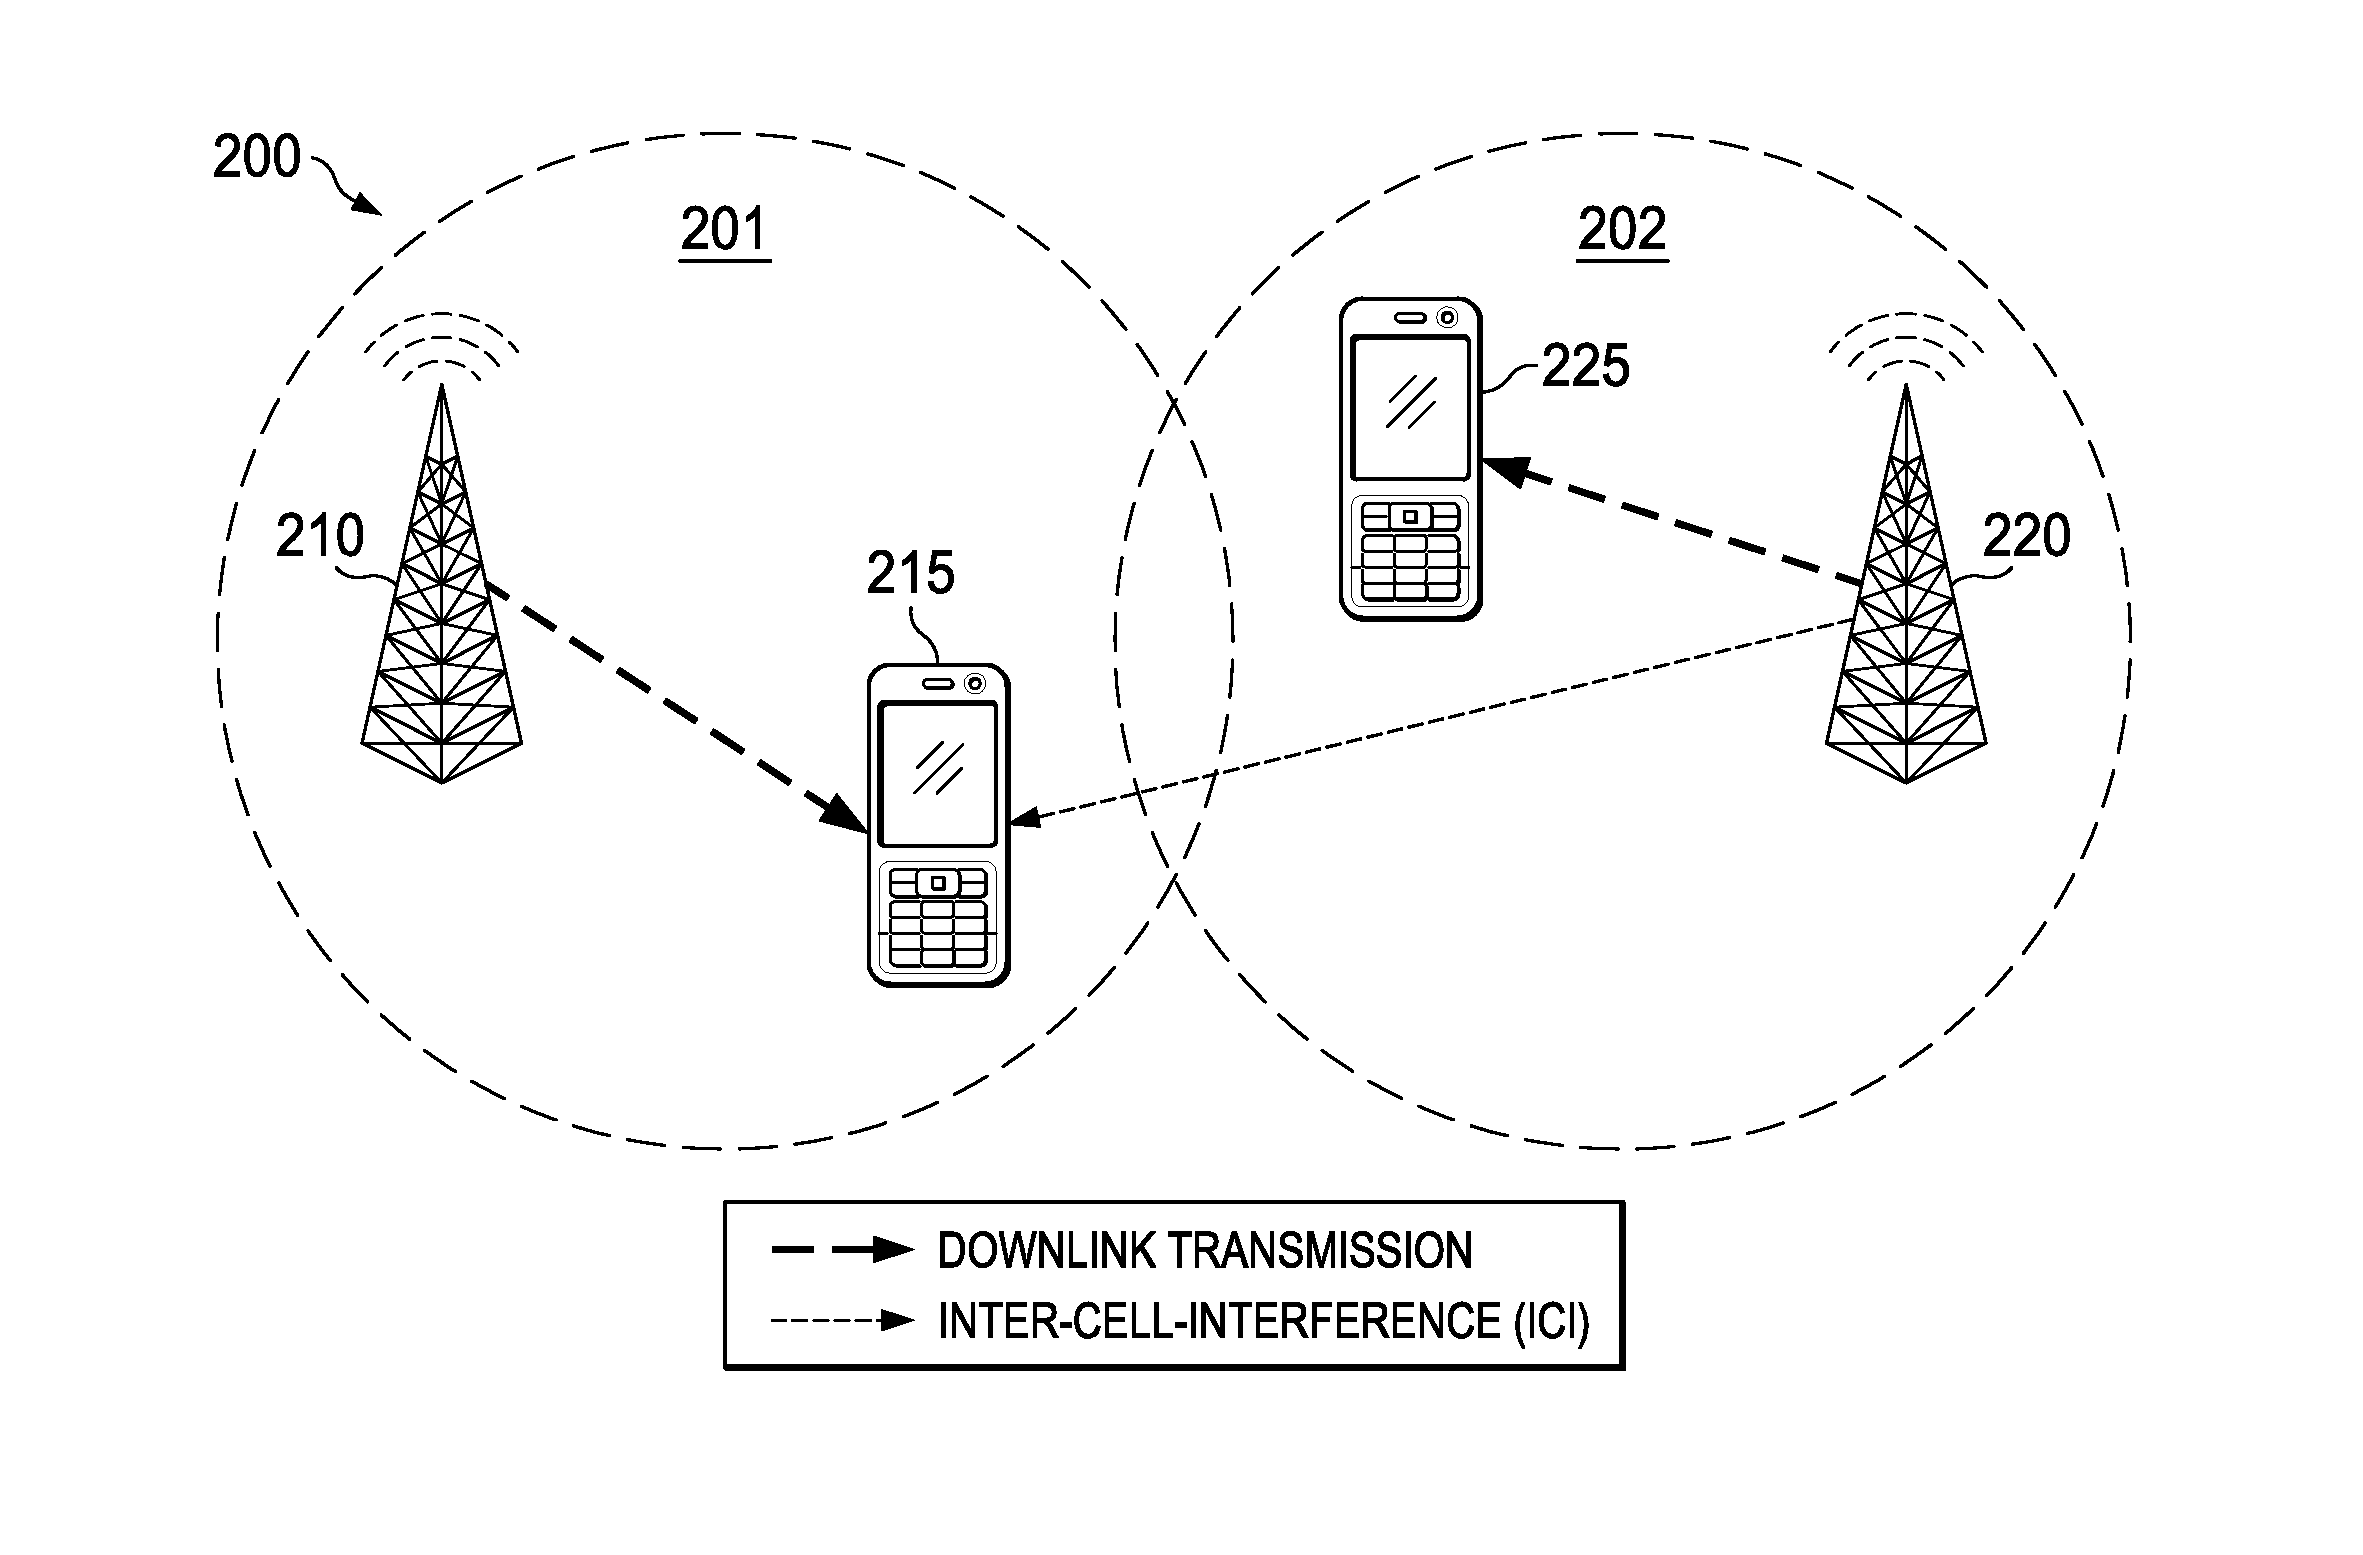 System and Method for Interference Management in Cellular Networks